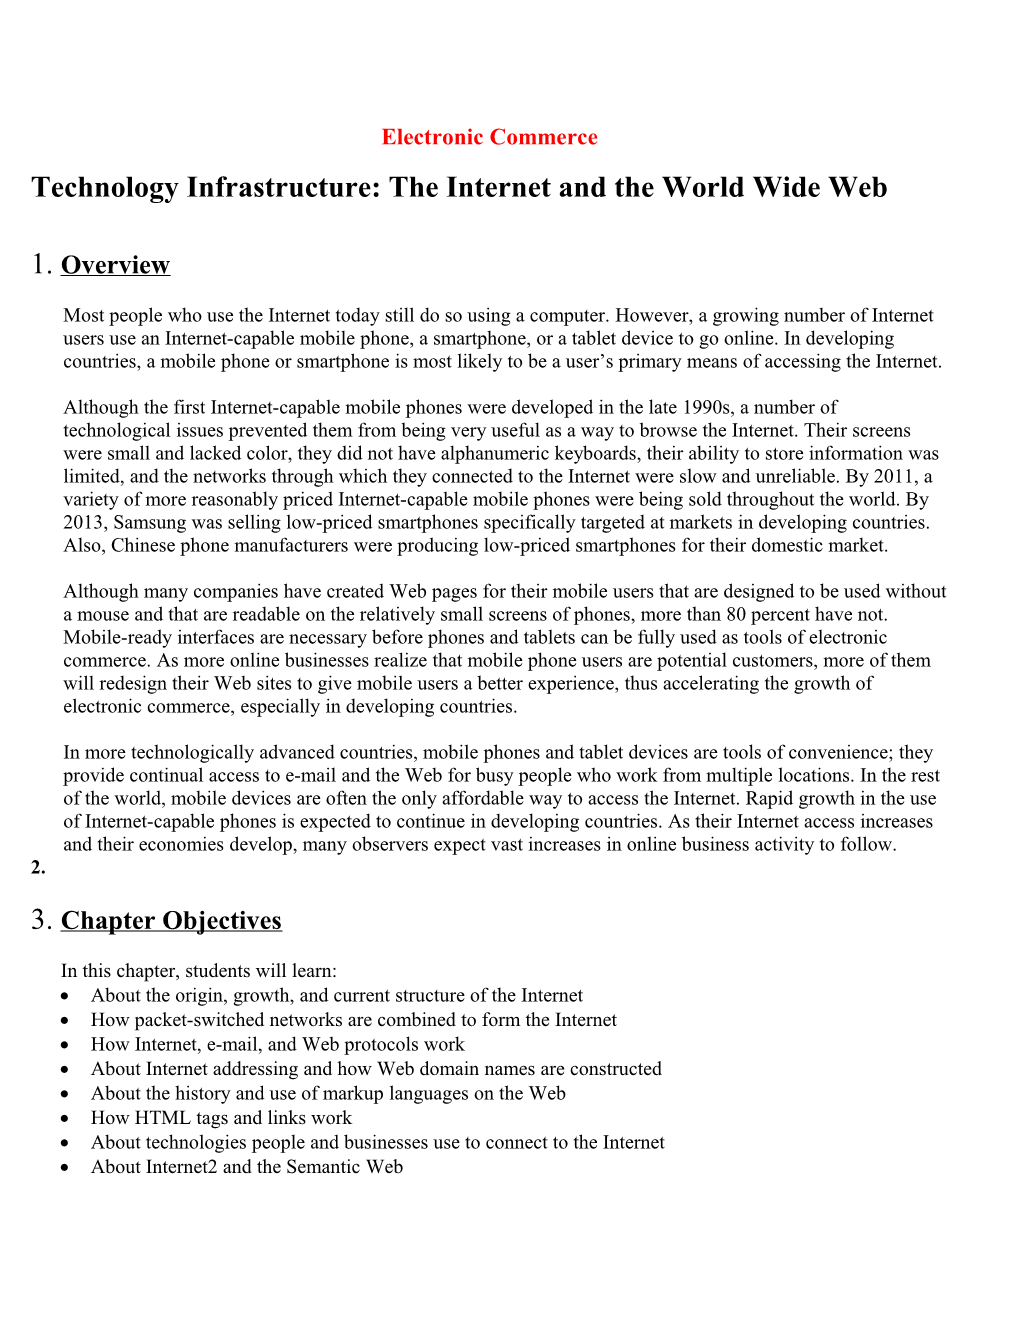 Technology Infrastructure: the Internet and the World Wide Web